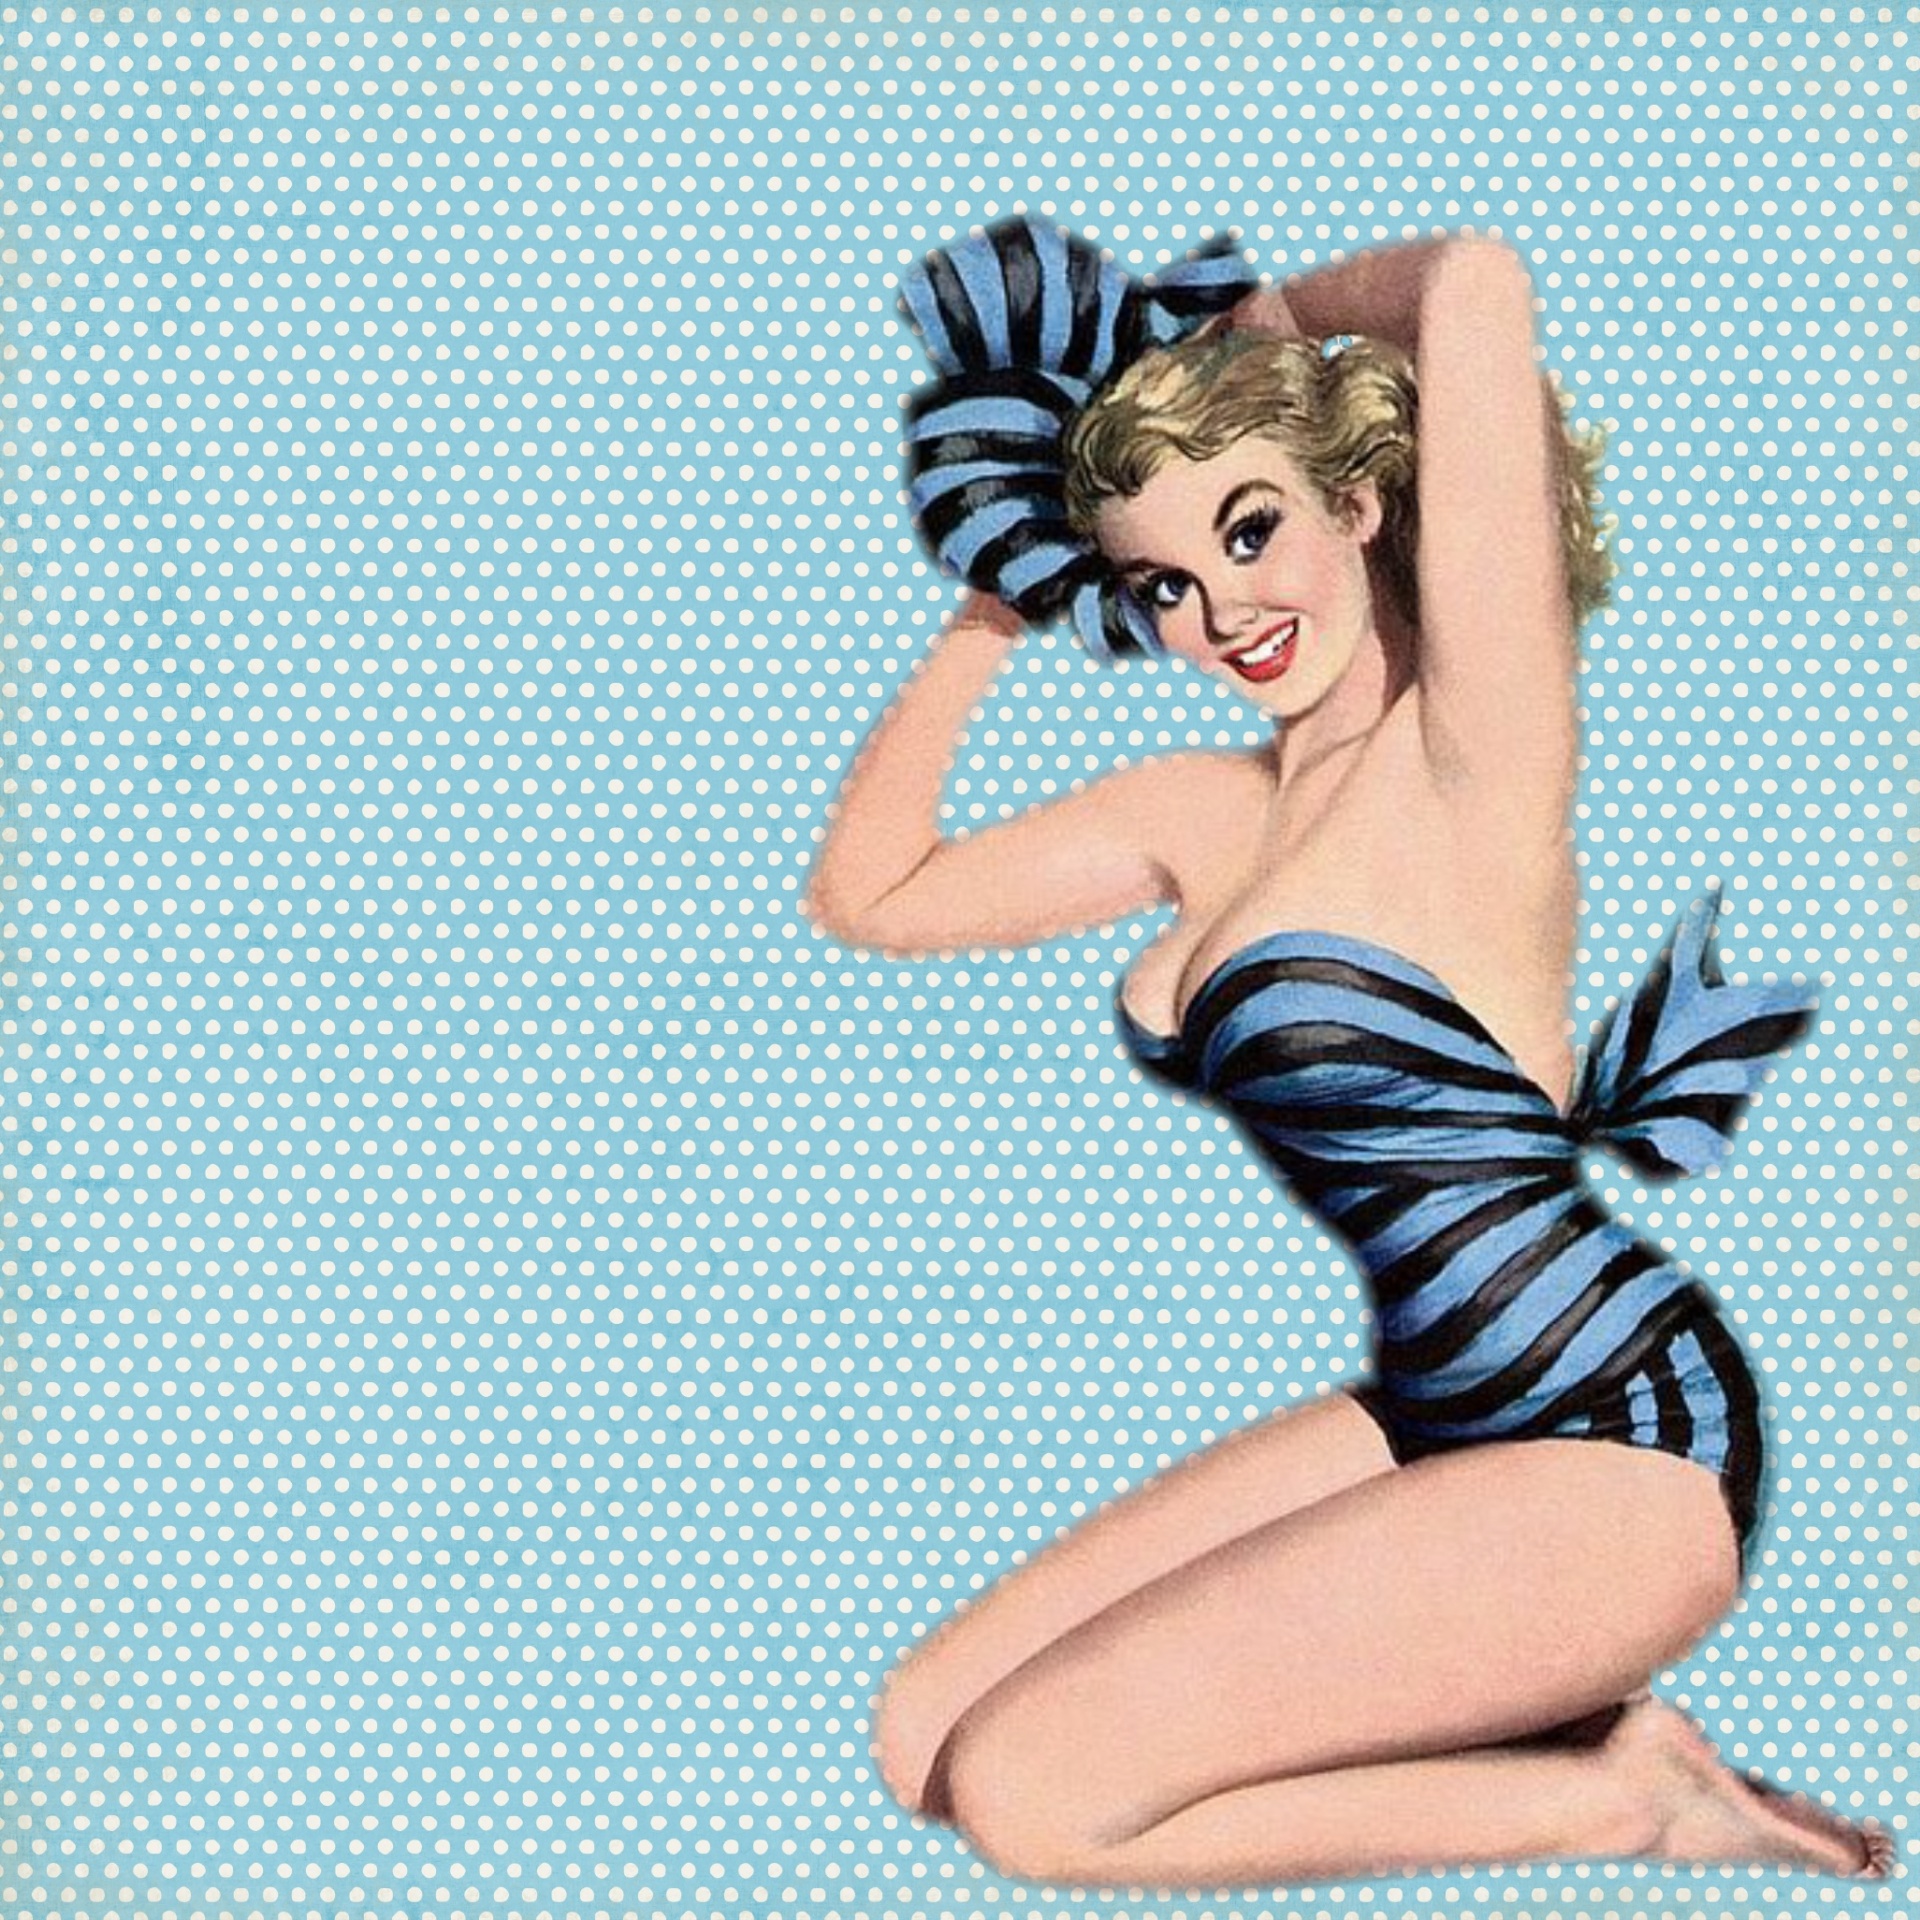 Retro Beautiful Pin-up Lady Digital Art Collage Sexy Girl - A fun and modern rework of Vintage Retro Art. Perfect for art projects, decoupage, scrapbooking and more!